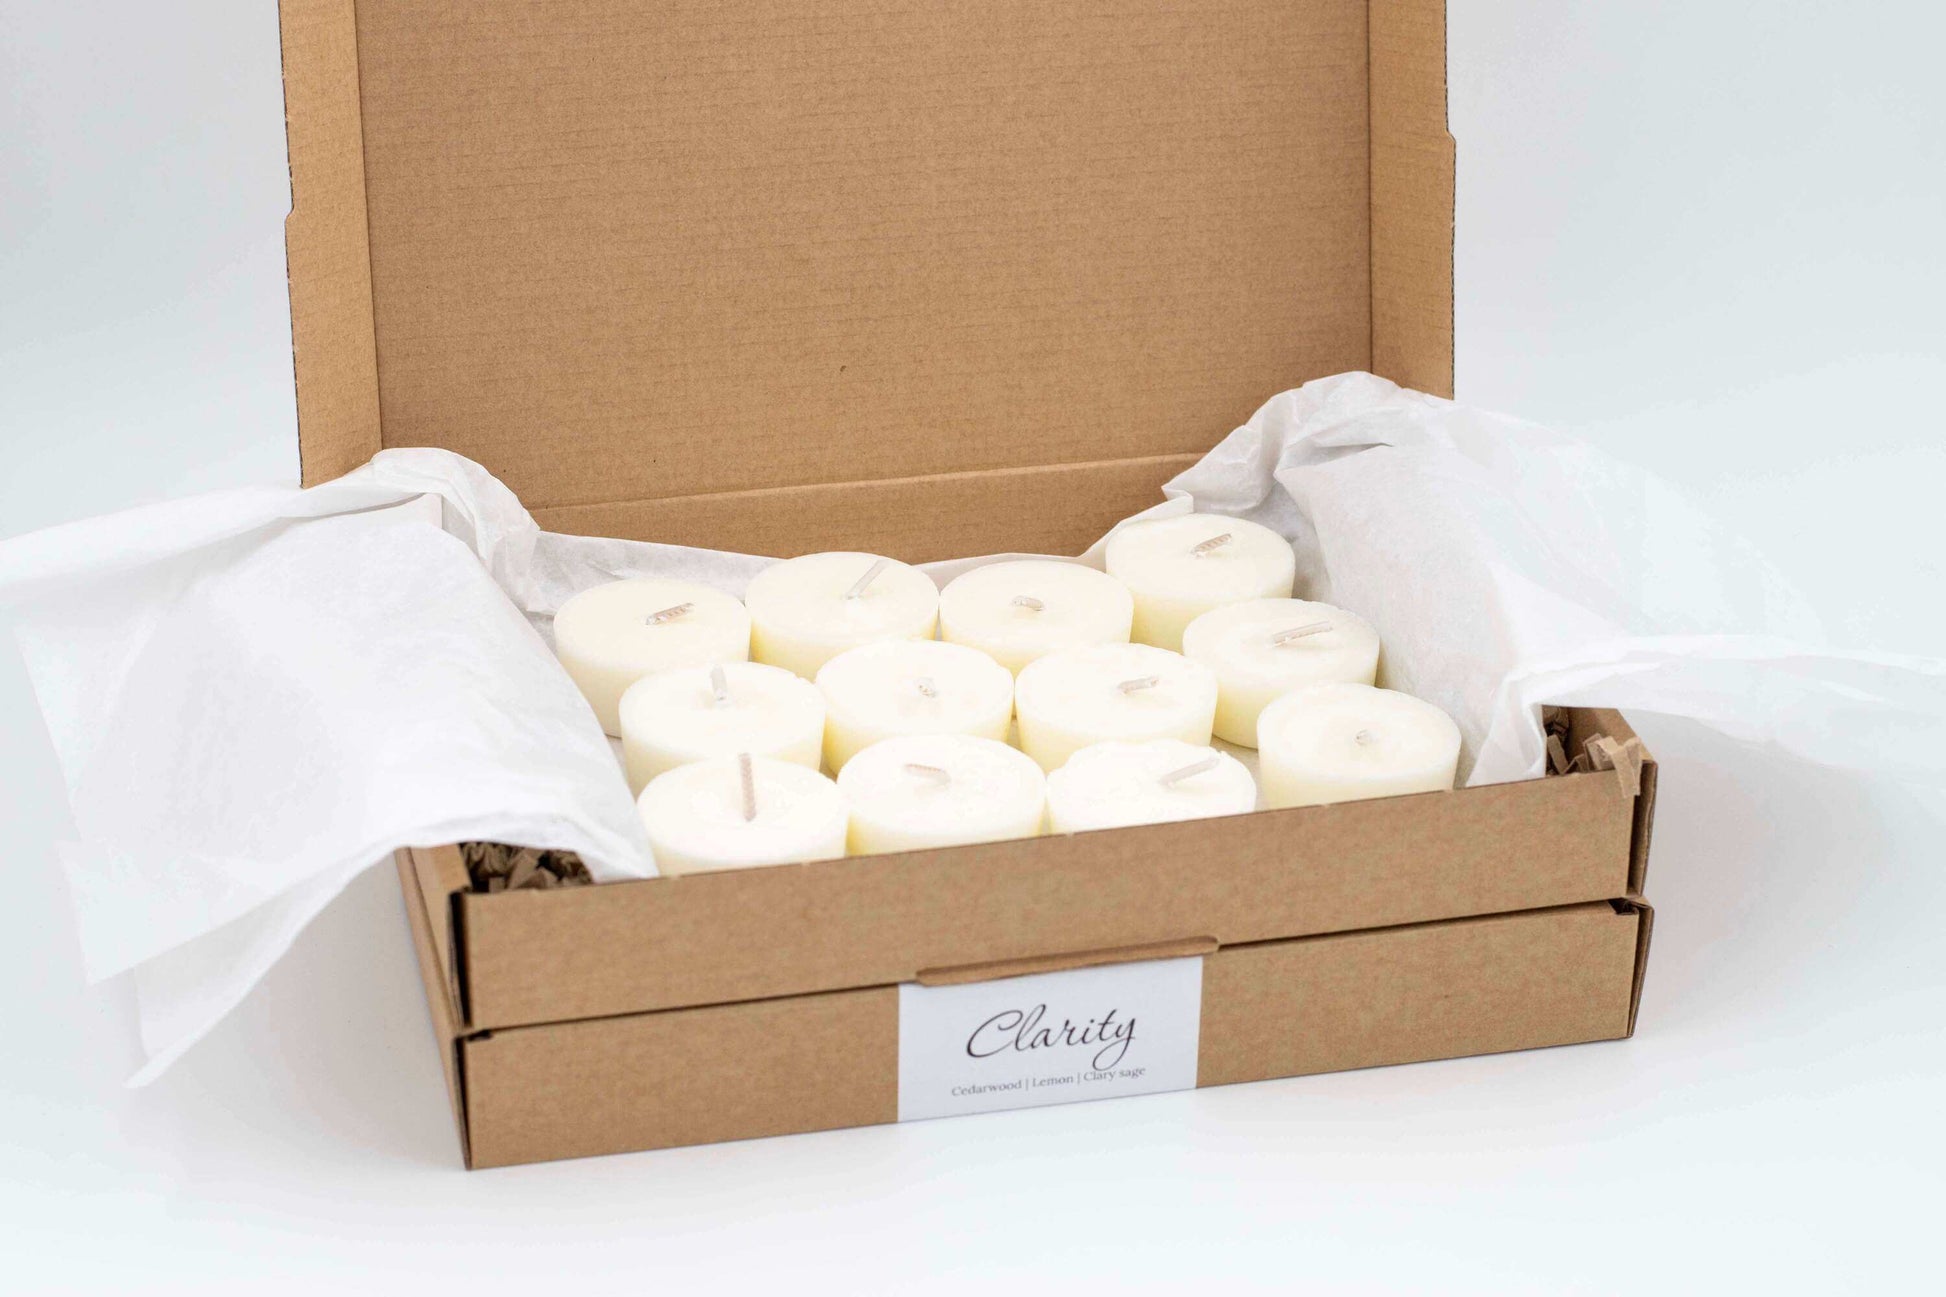 12-pack of Clarity aromatherapy tealights with cedarwood, lemon, and clary sage, eco-friendly and vegan, in a recyclable cardboard box."